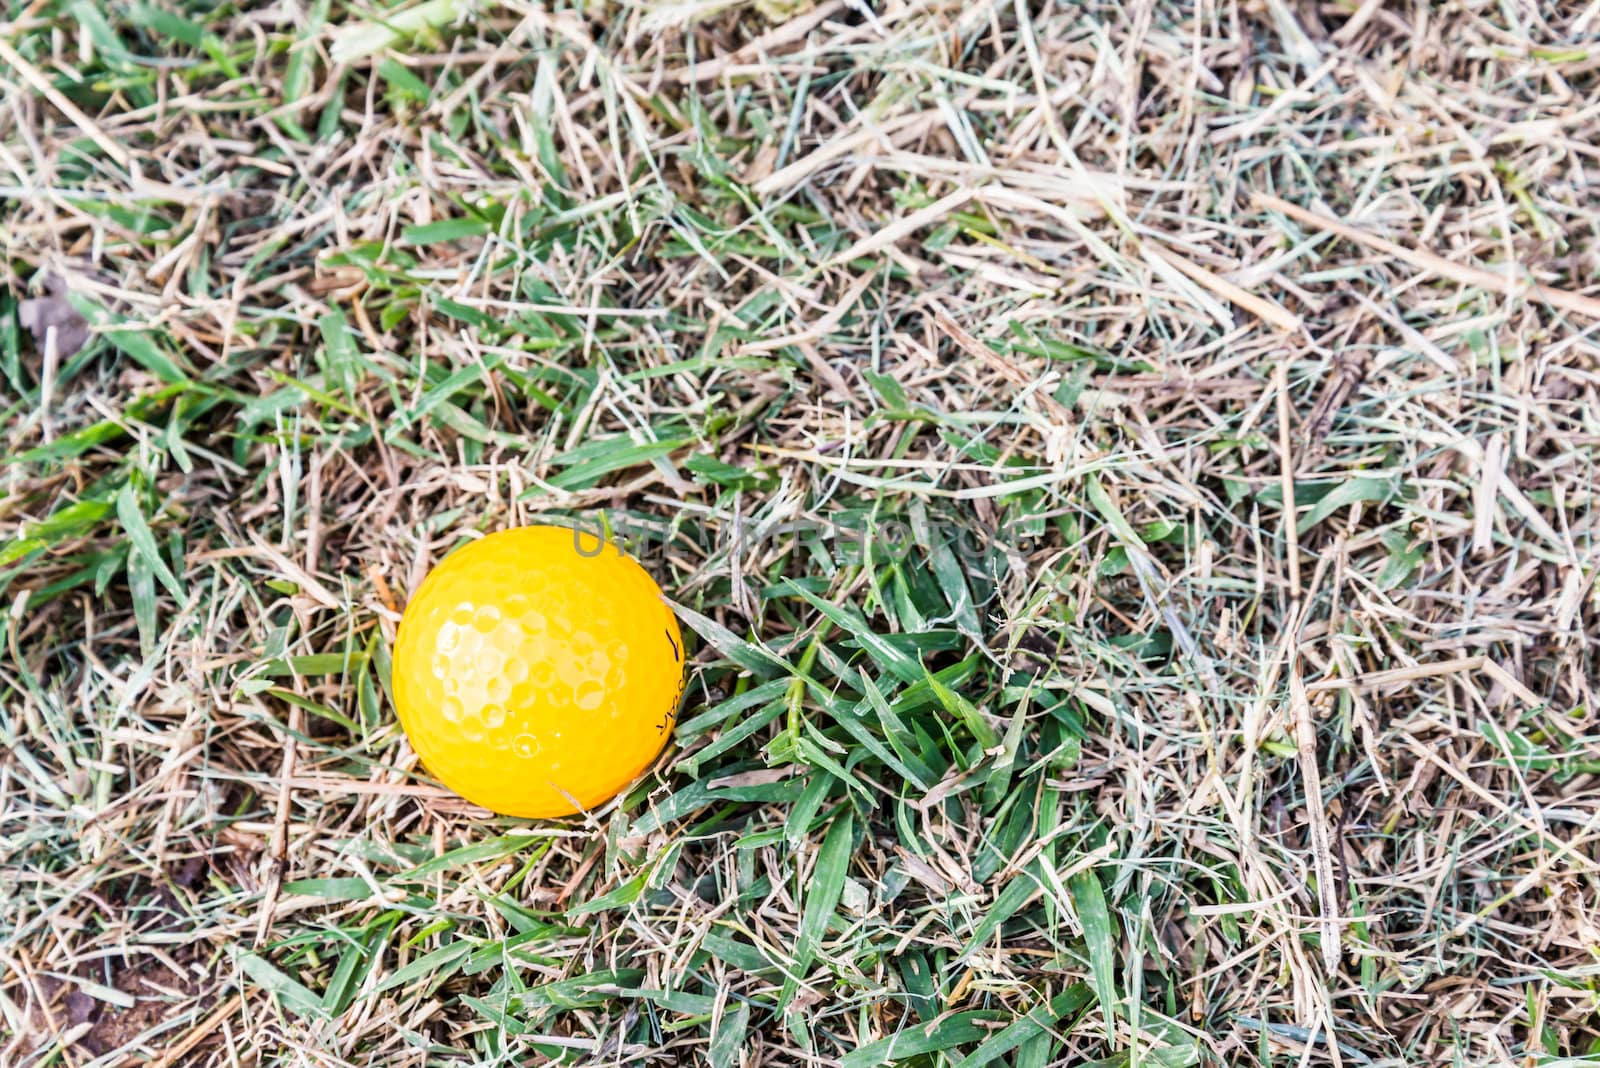 Yellow Miniature Golf Ball in the rough by wmitrmatr